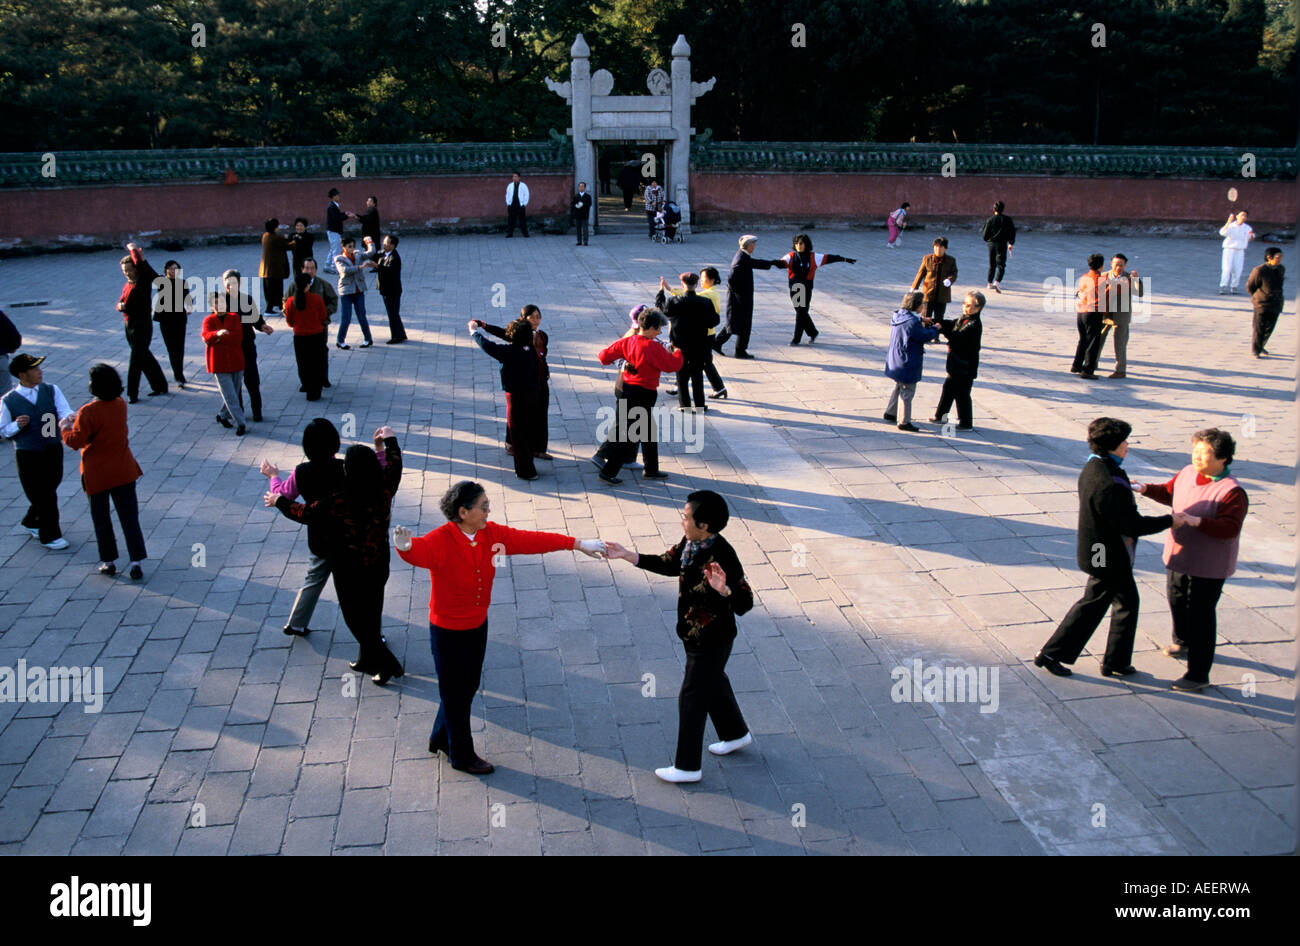 Beijing China - Ballroom dancing in the early morning at Ritan park before work. Stock Photo